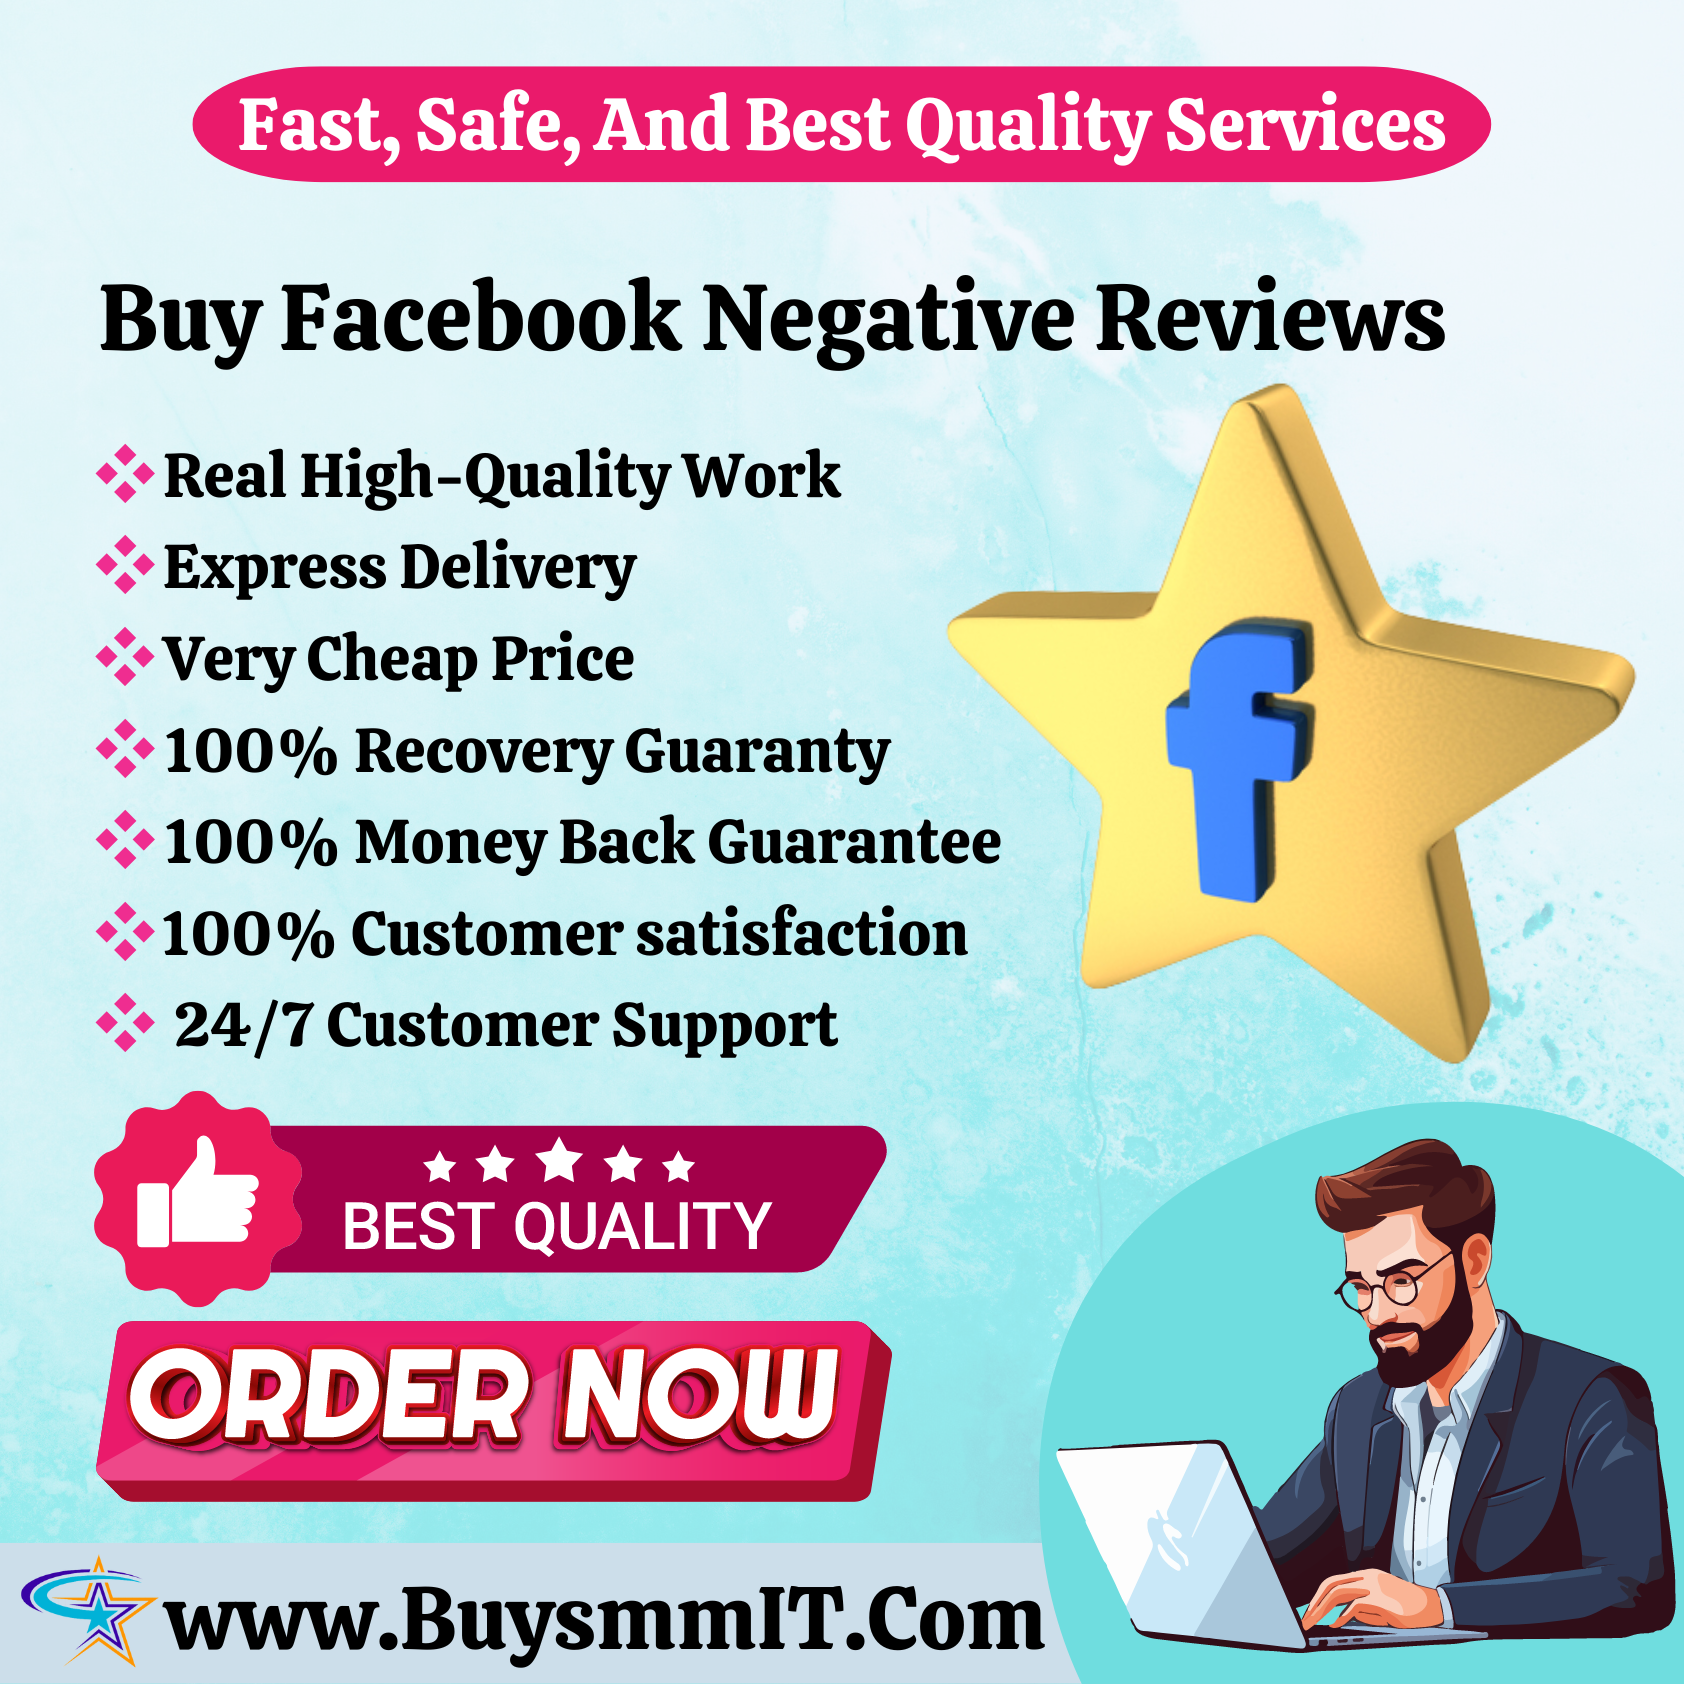 Buy Facebook Negative Reviews-High Quality Service